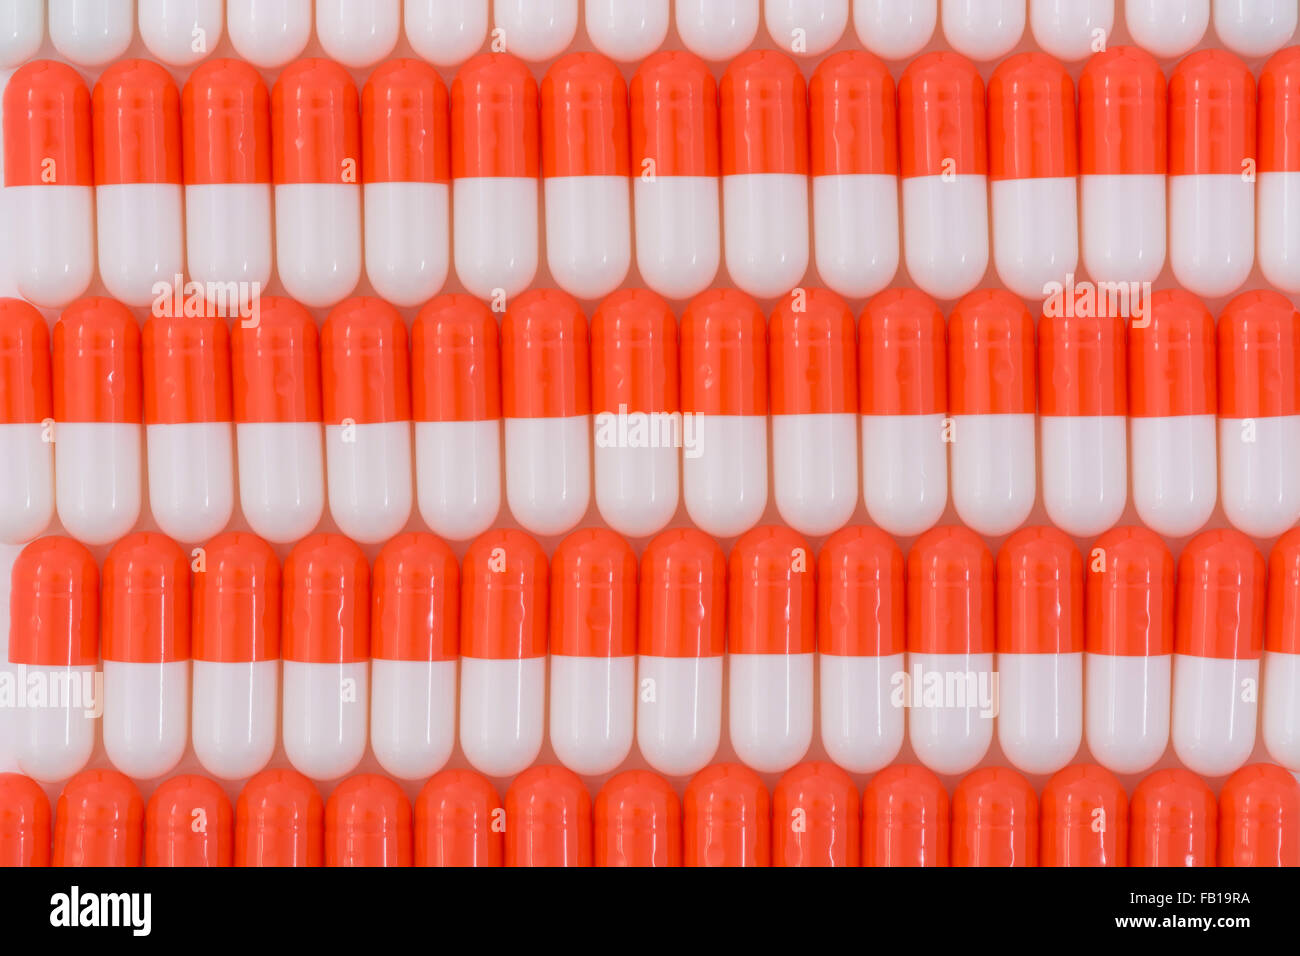 Close-up of pills - capsule form made of gelatin. Orange / White pills. Metaphor taking on American drug companies over high drug prices, drug trials. Stock Photo